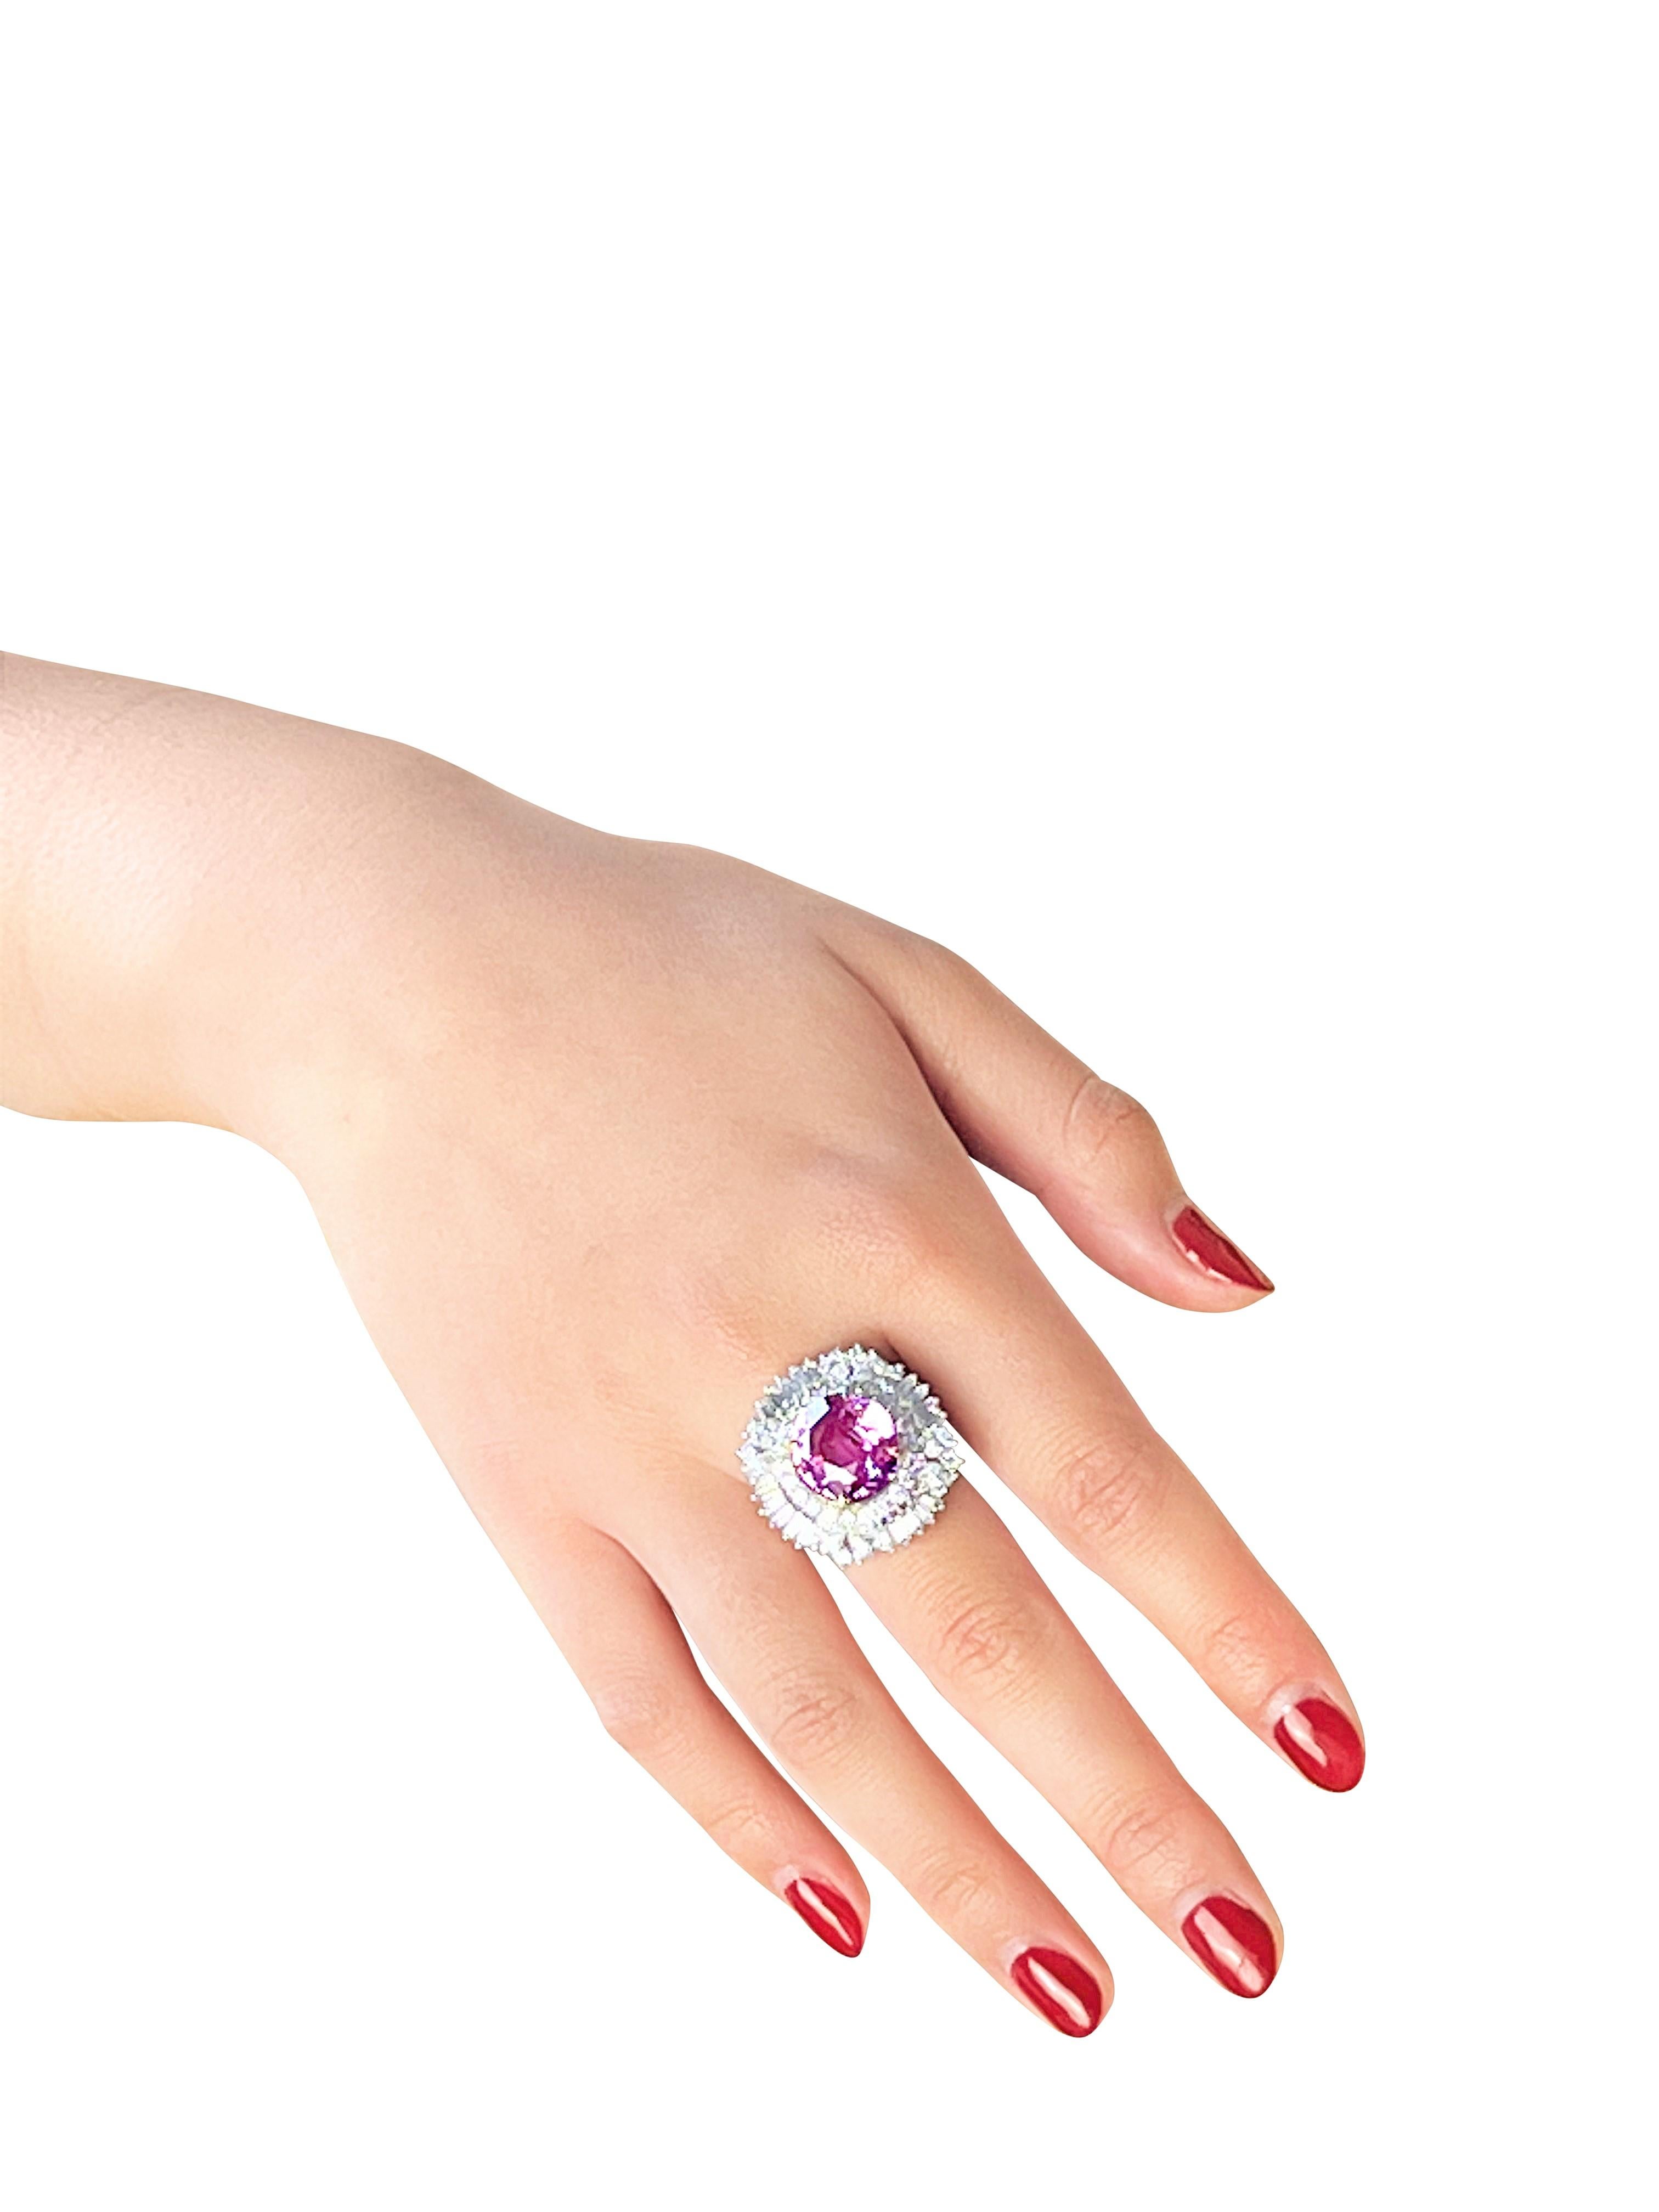 Women's GRS Certified 10.11 Carat Natural Untreated Pink Sapphire Ring For Sale